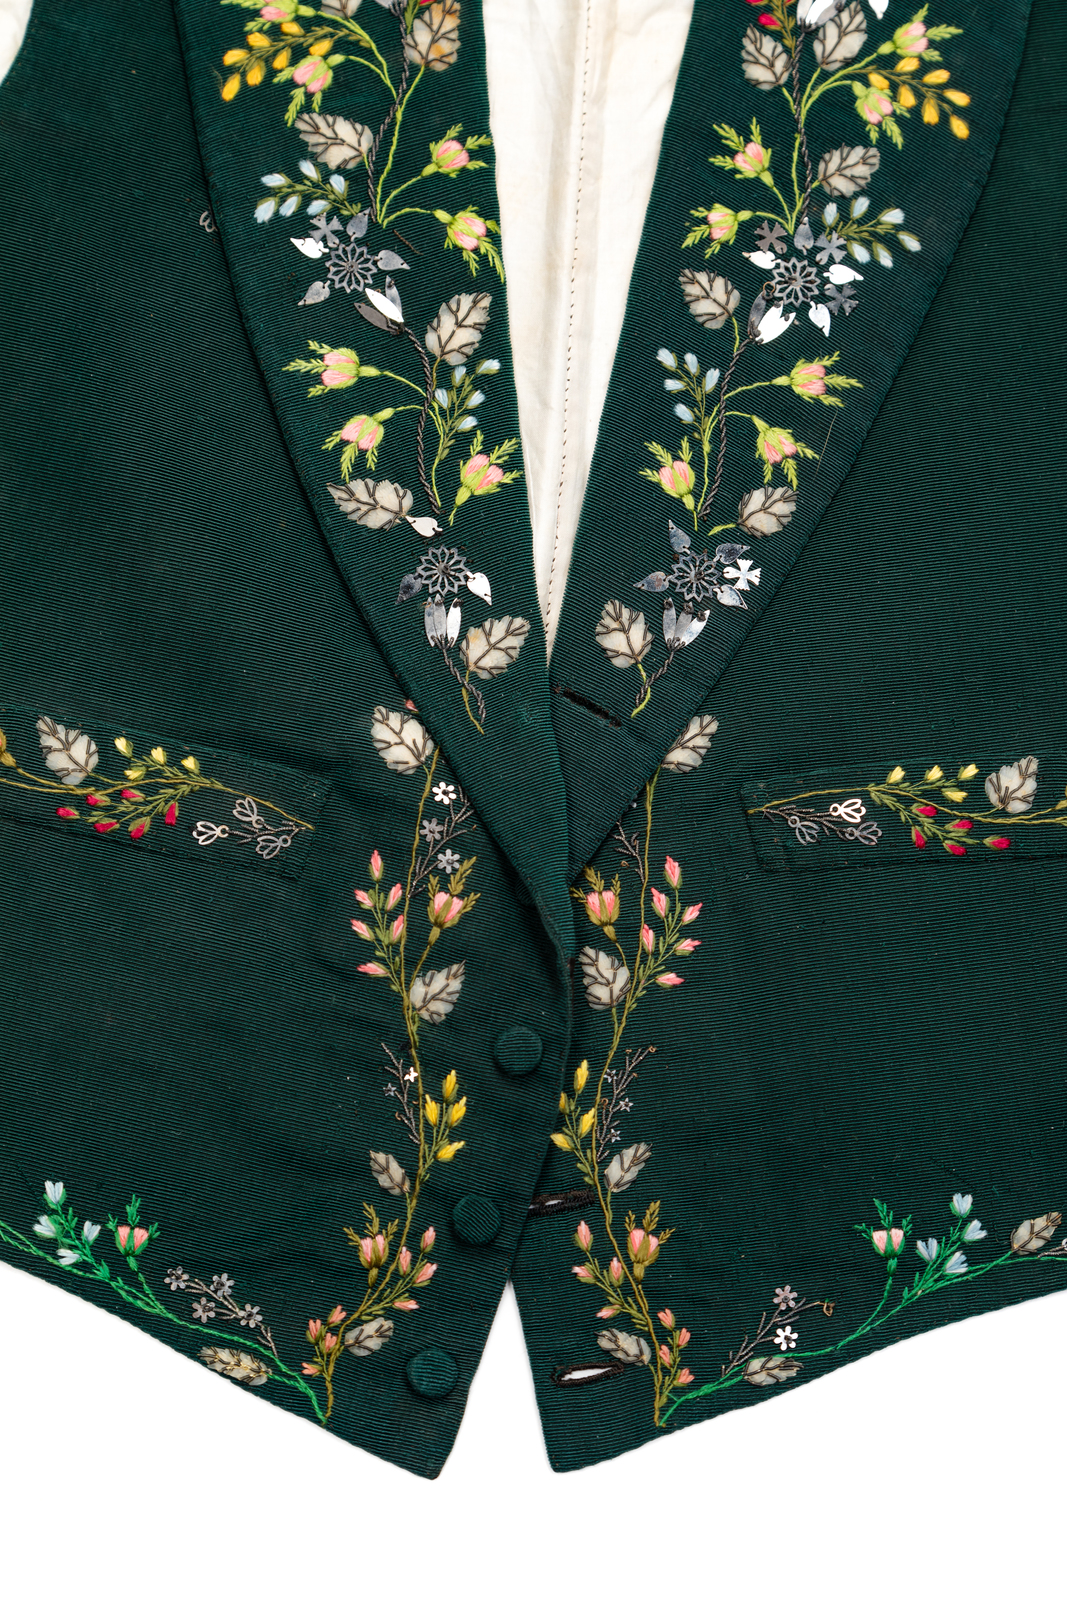 Men's Embroidered Green Ribbed Silk Waistcoat, 1830s